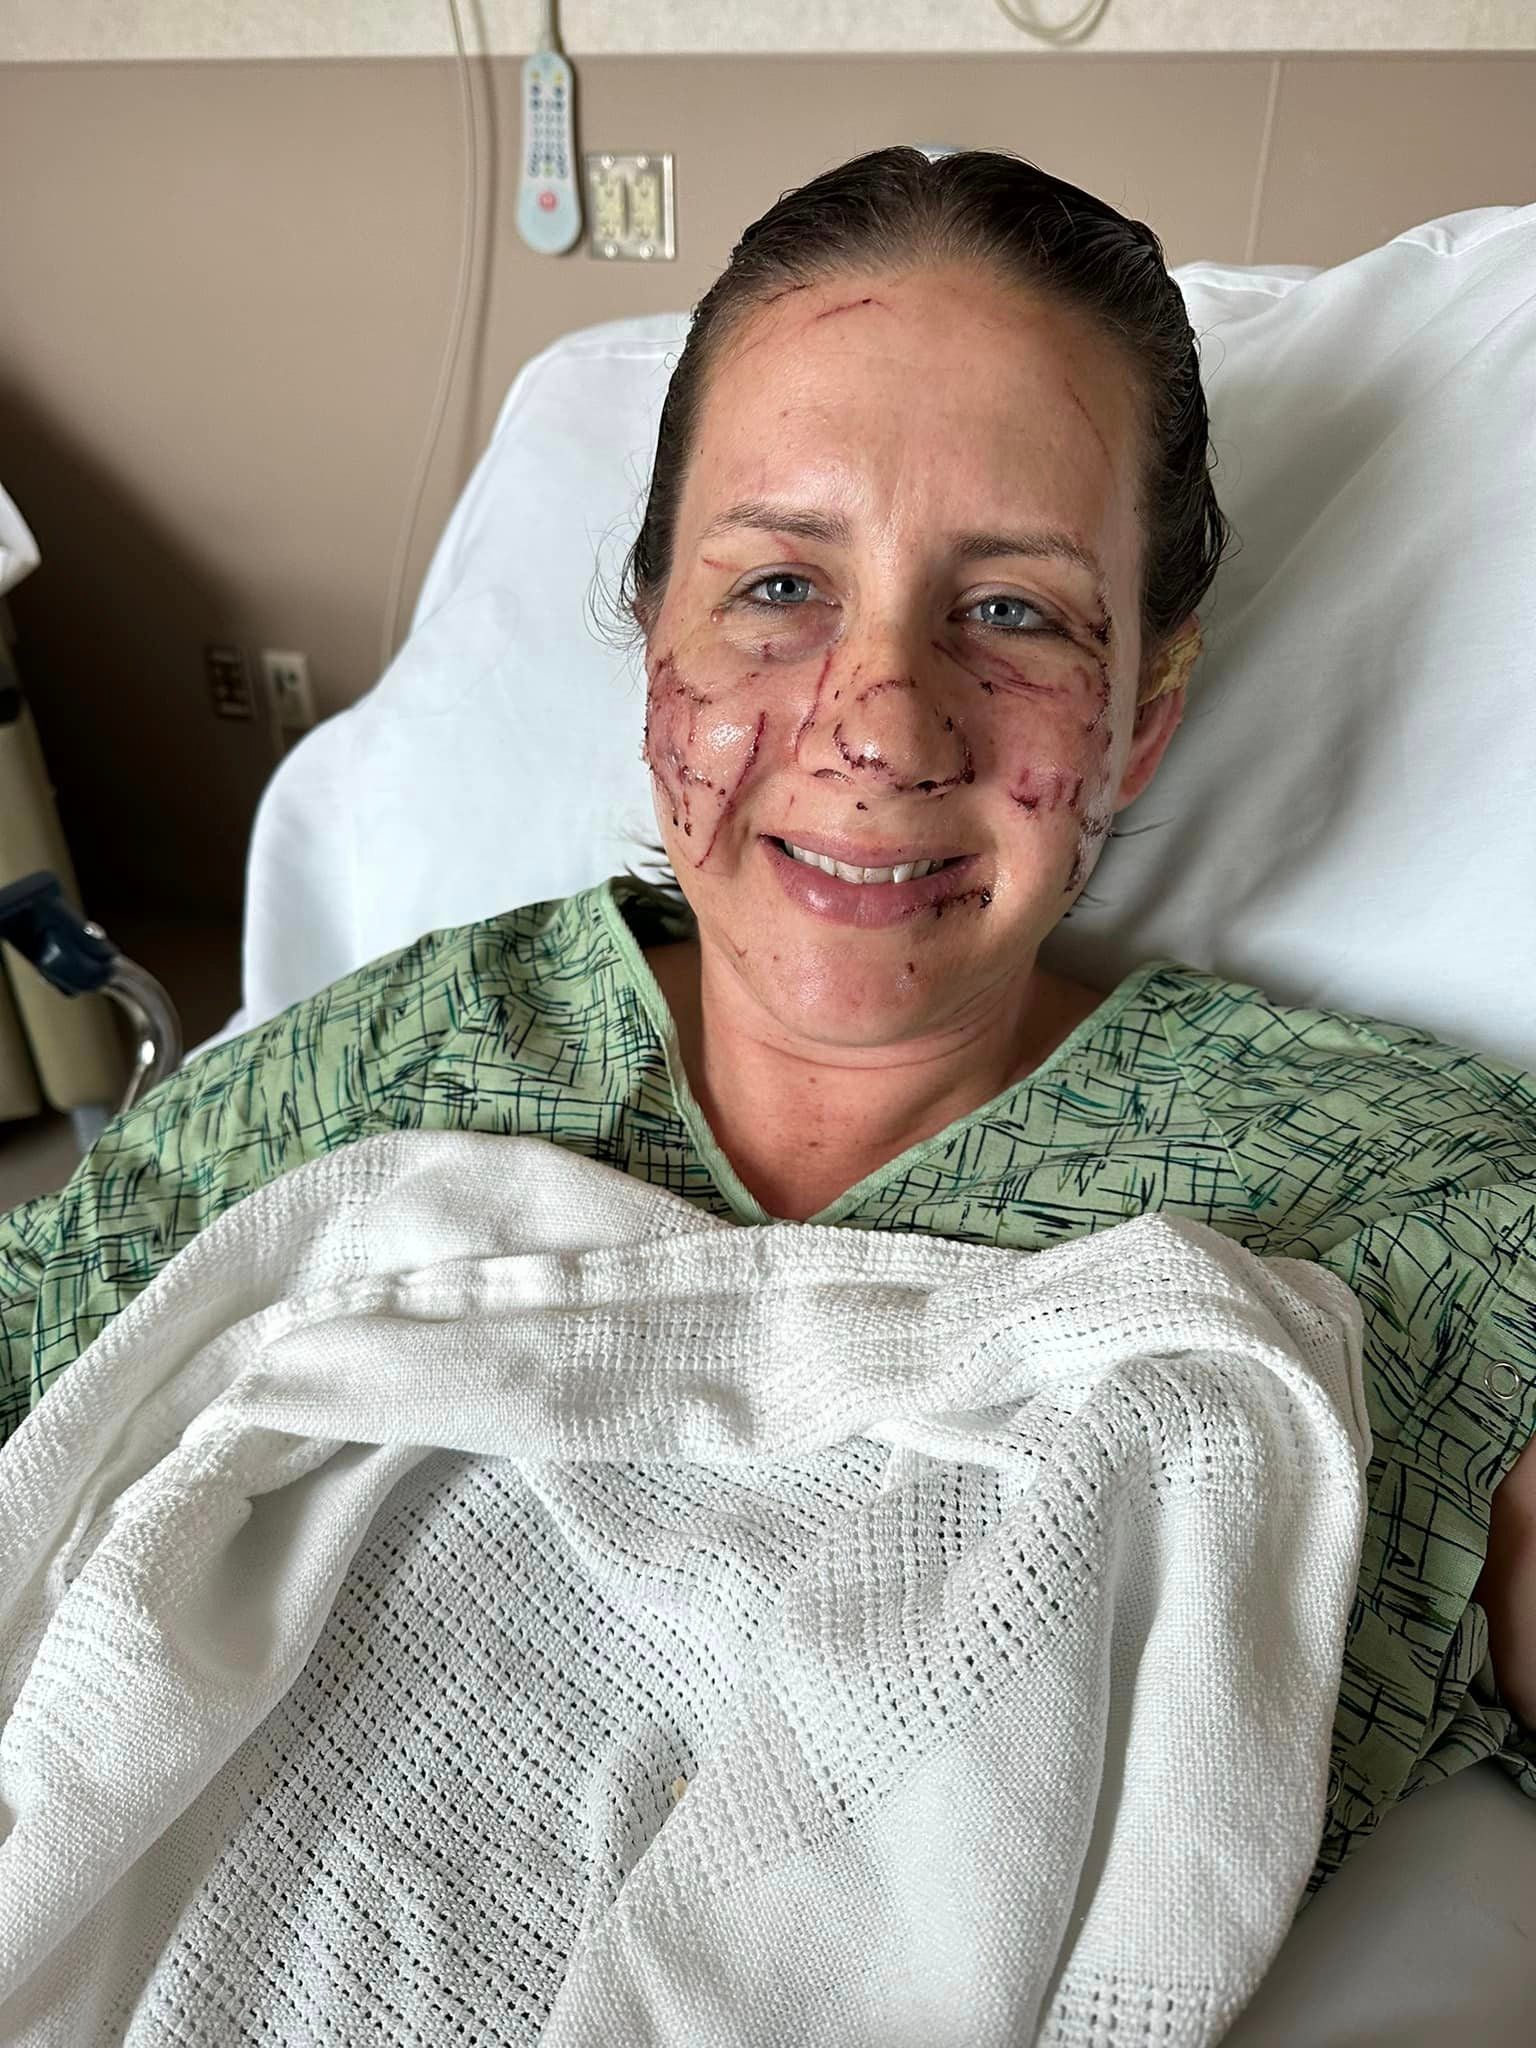 Jen Royce in the hospital after the otter attack